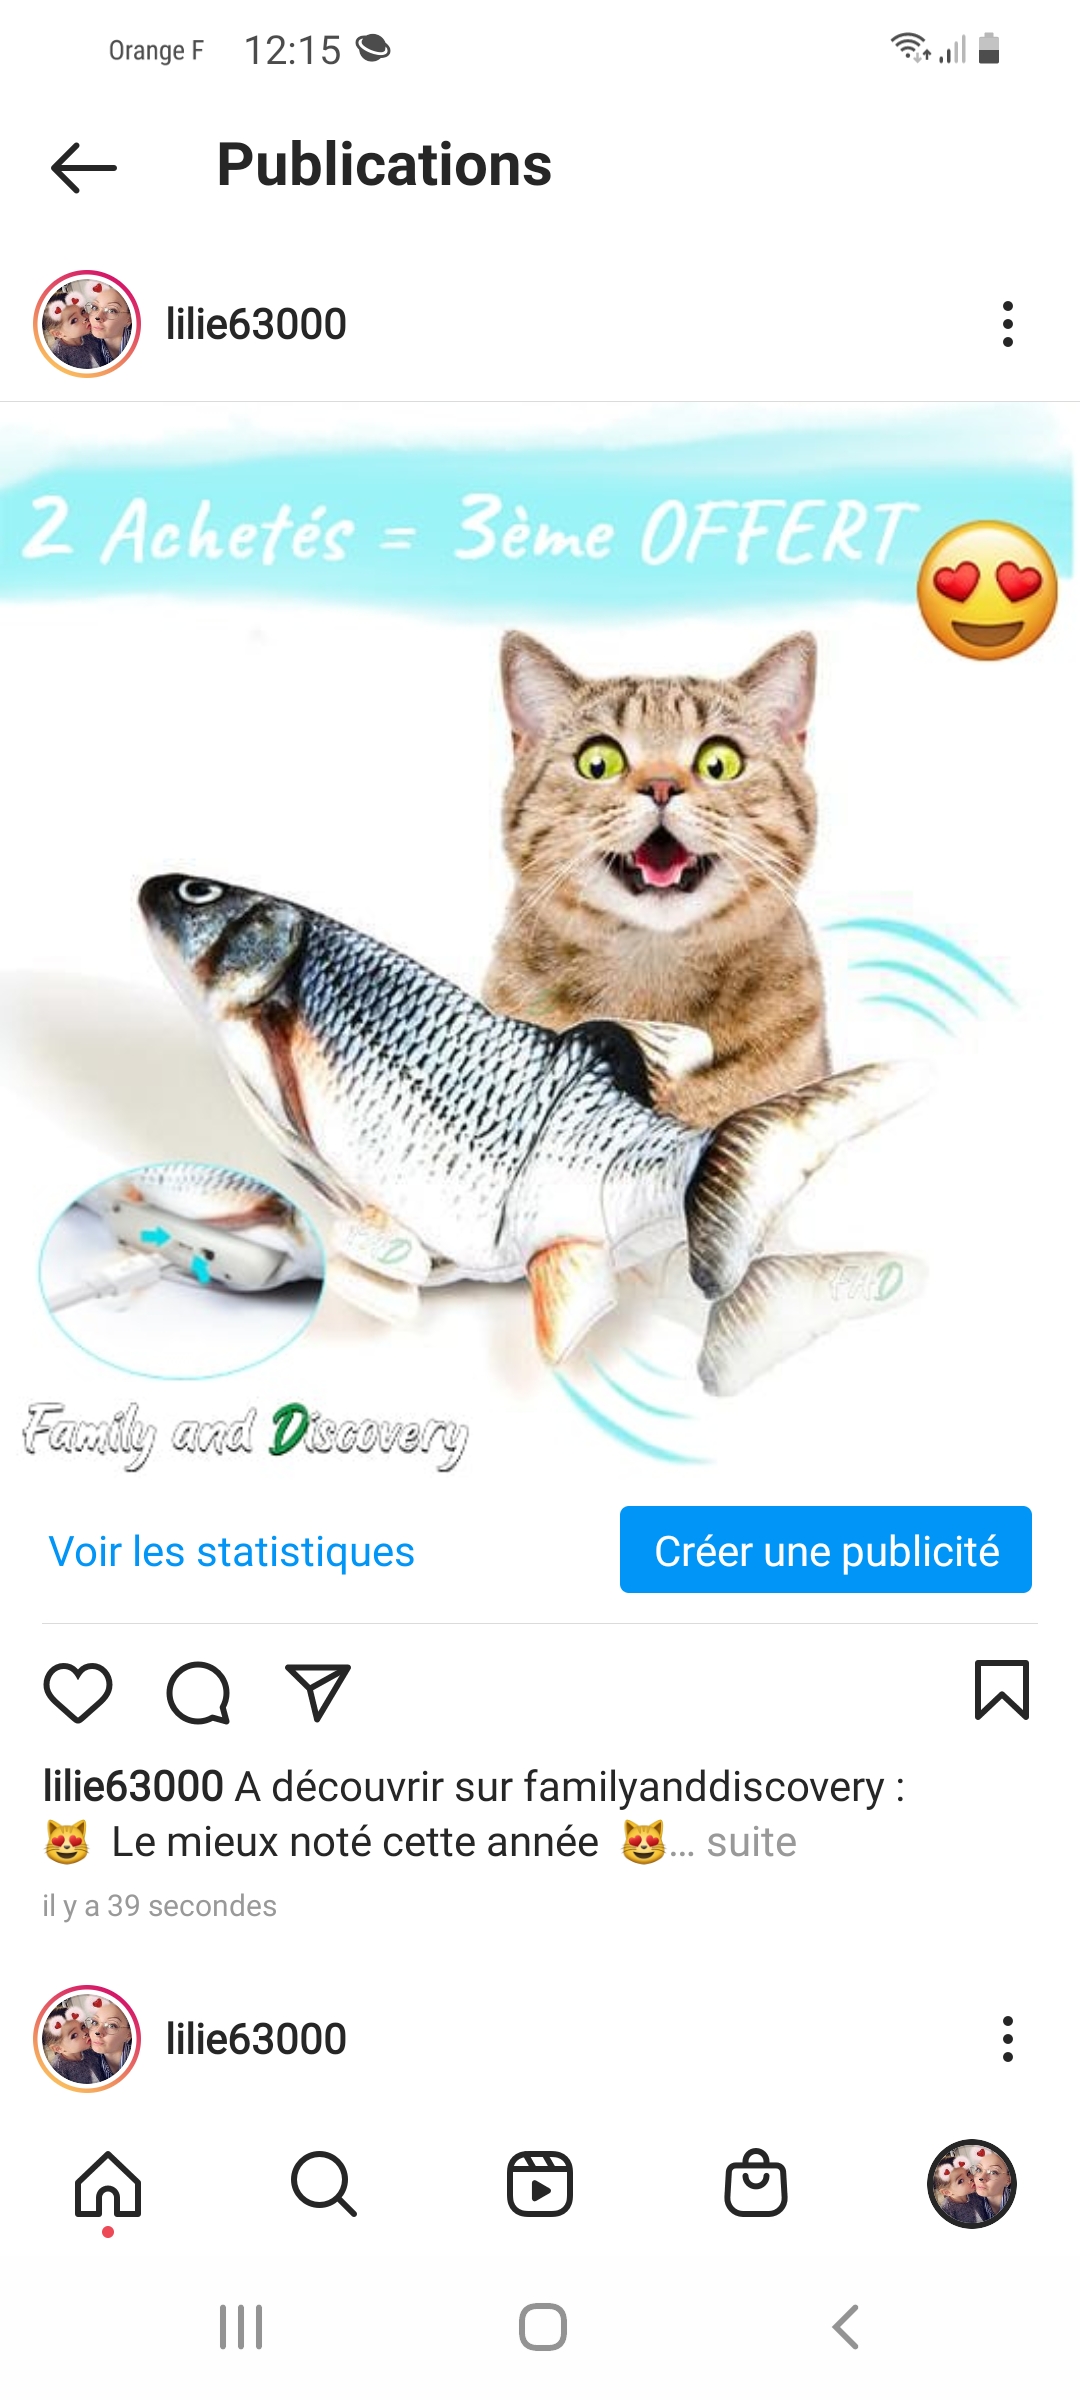 Promotion du poisson interactif Familly and Discovery